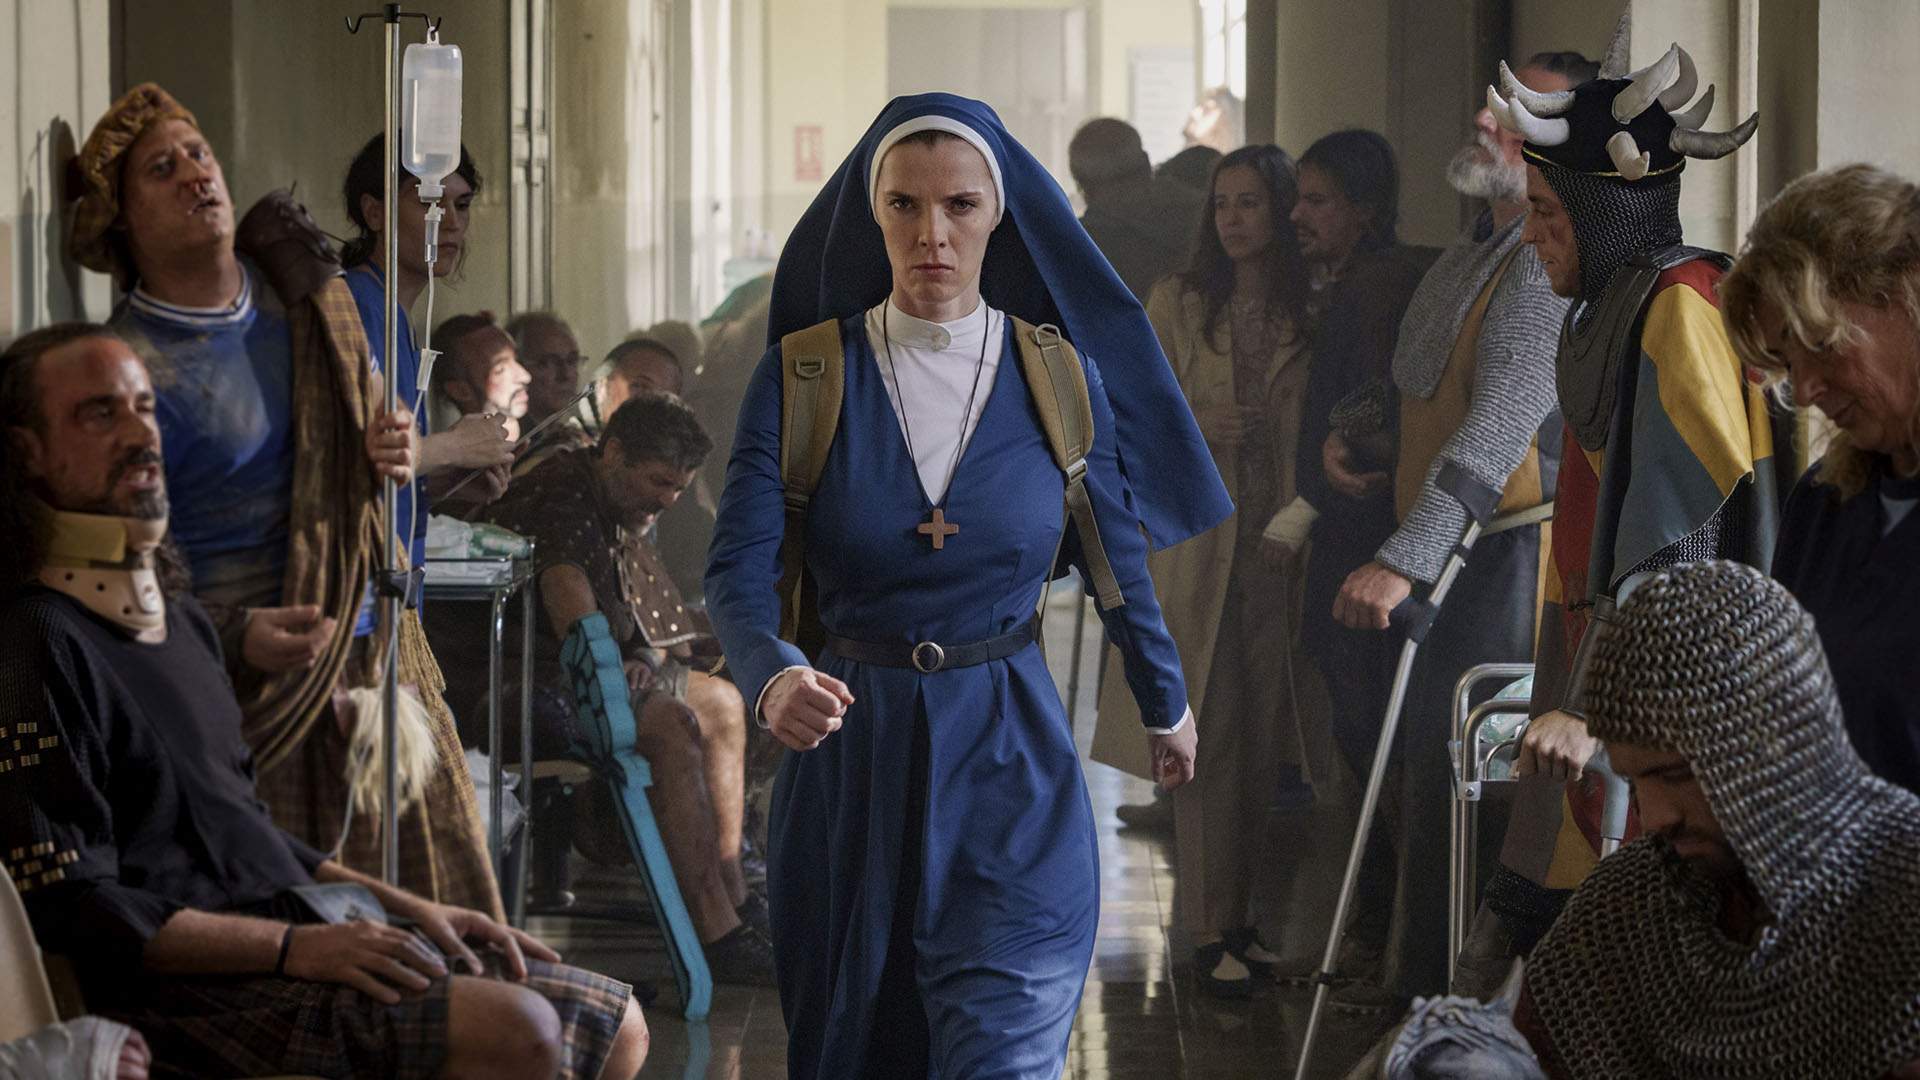 Nun-Versus-AI Series 'Mrs Davis' Is 2023's Most Wildly Ridiculous and Entertaining New Show So Far